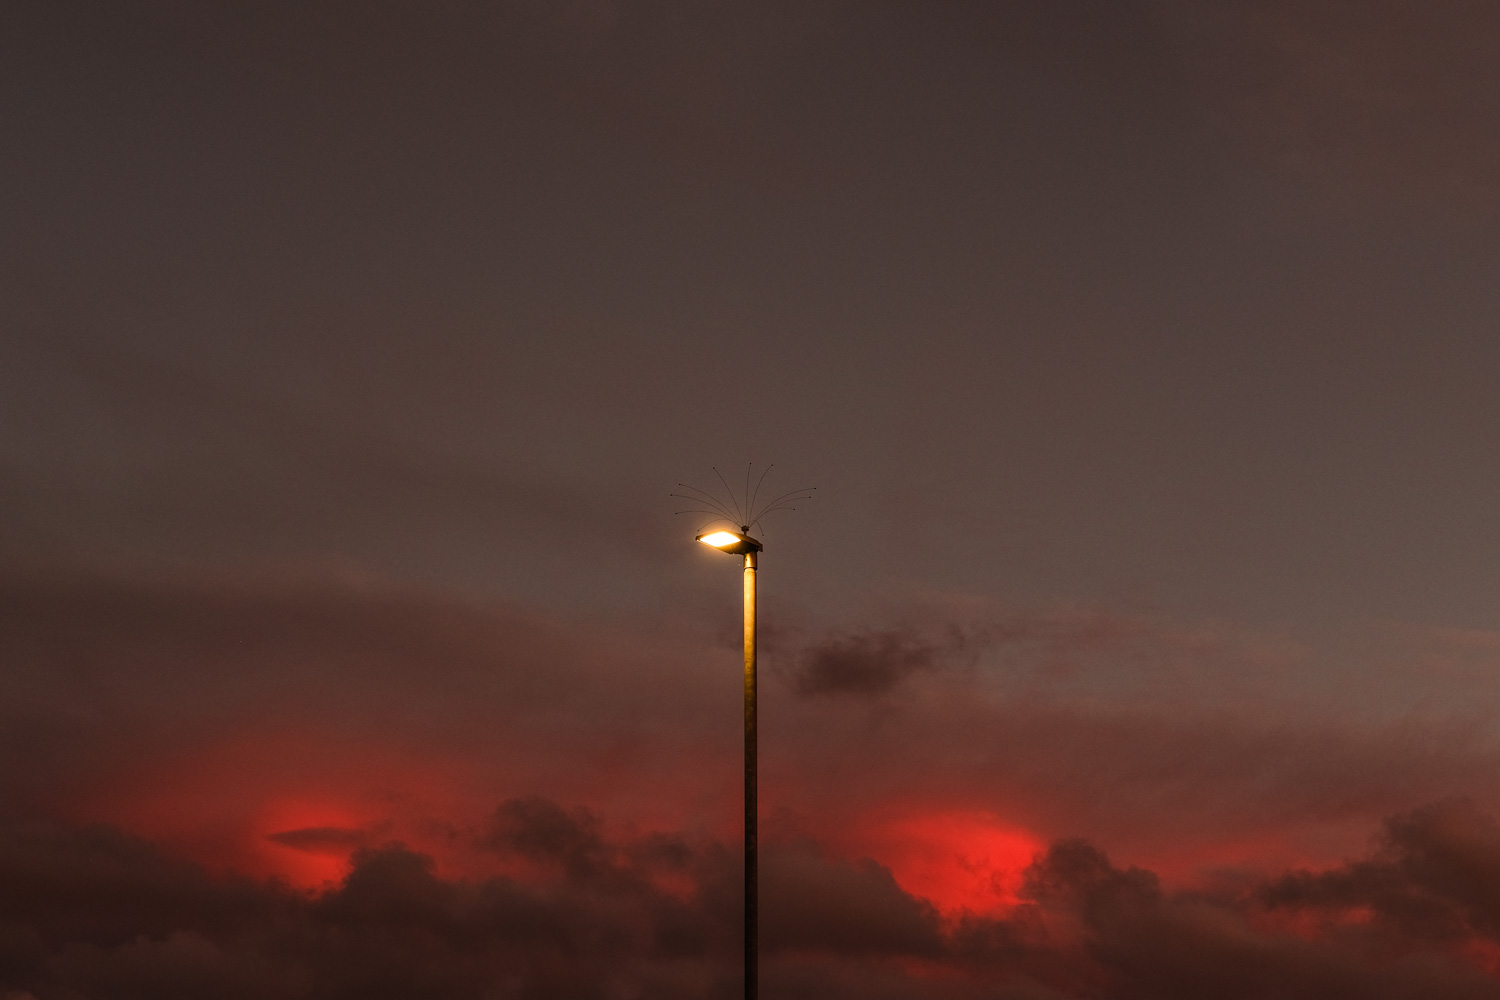 Sunset cloudscape behind street light in car park at Tesco, Seaton 14_10_22 2